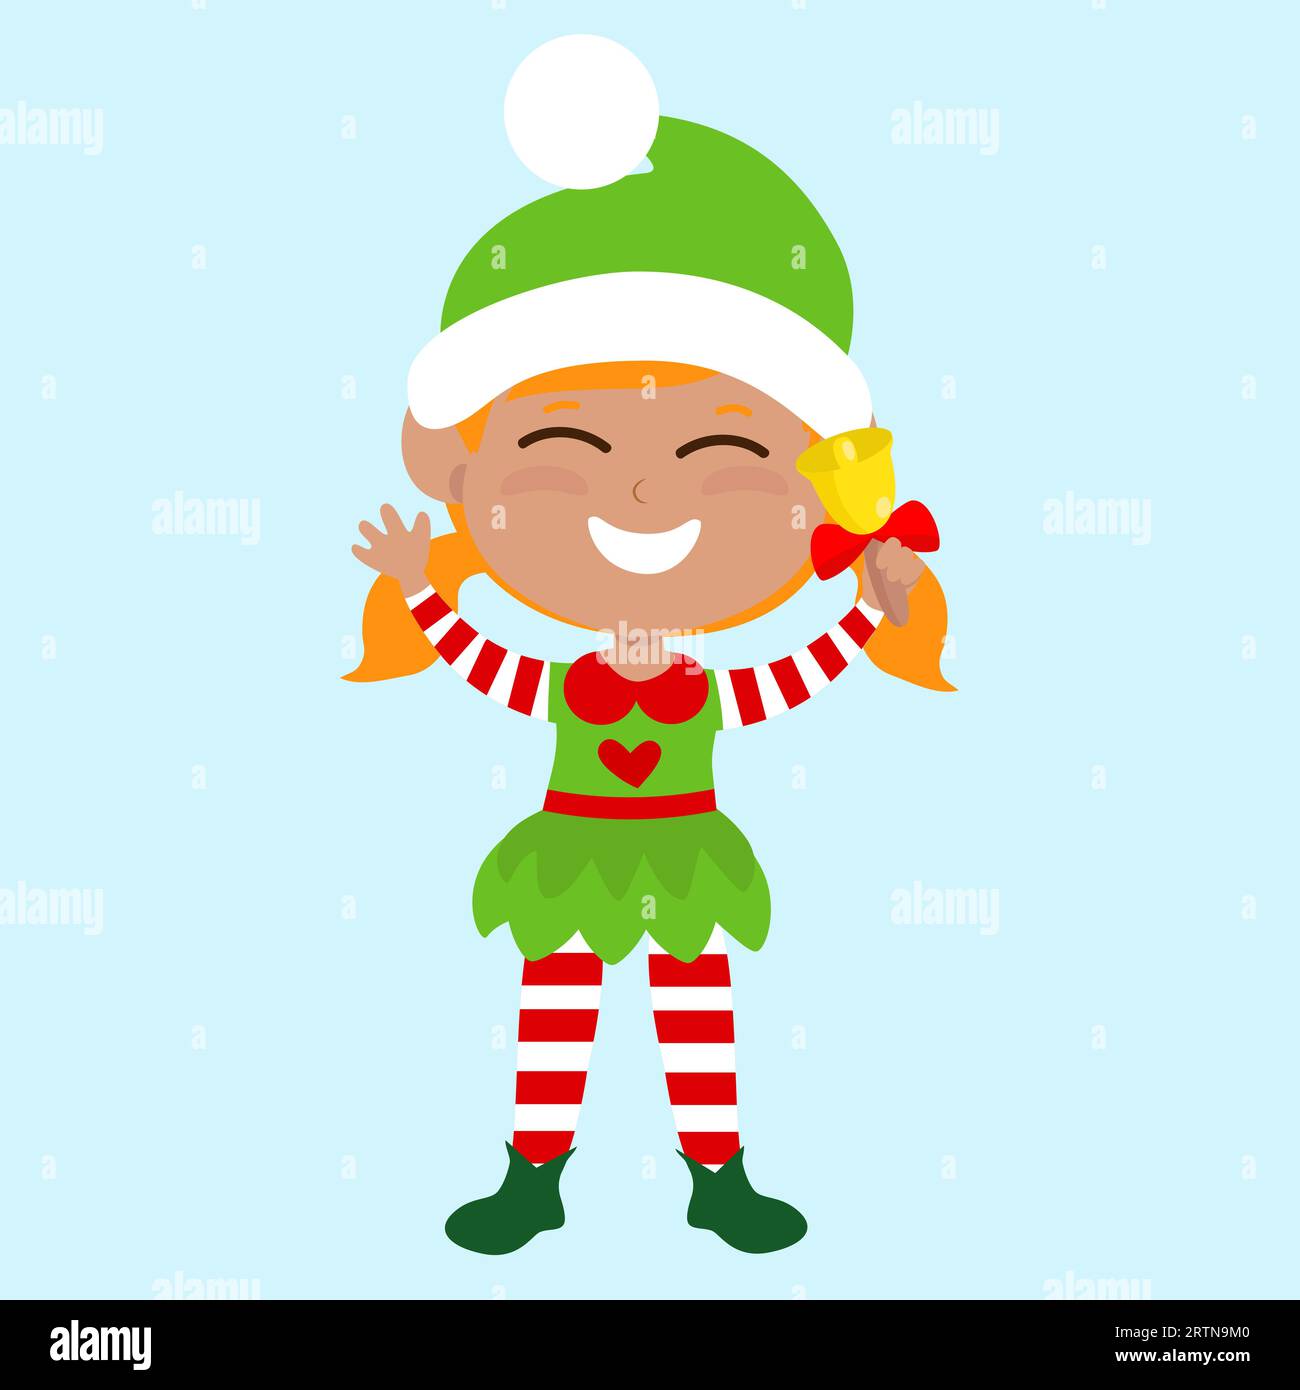 The elf stands straight and holding a bell in his hand. The child is happy and smiling and he is delighted. Stock Vector